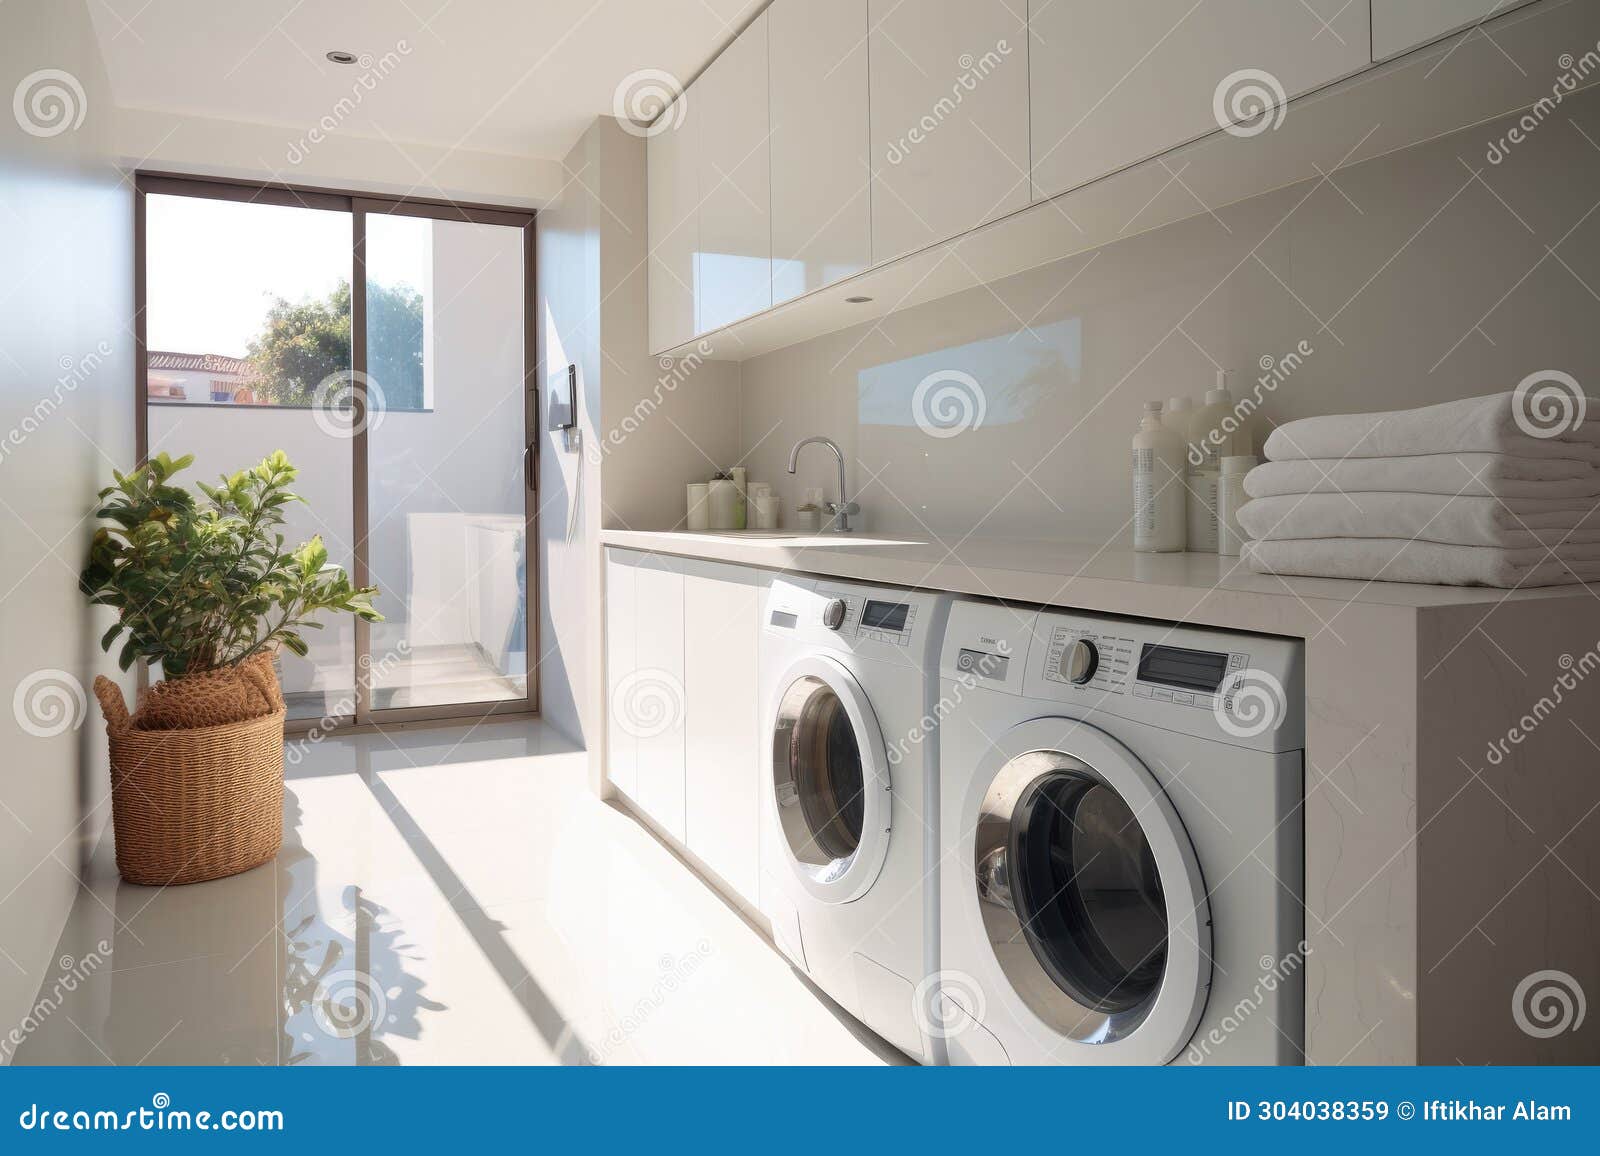 A Laundry Room Featuring a Washer and Dryer for Convenient and ...